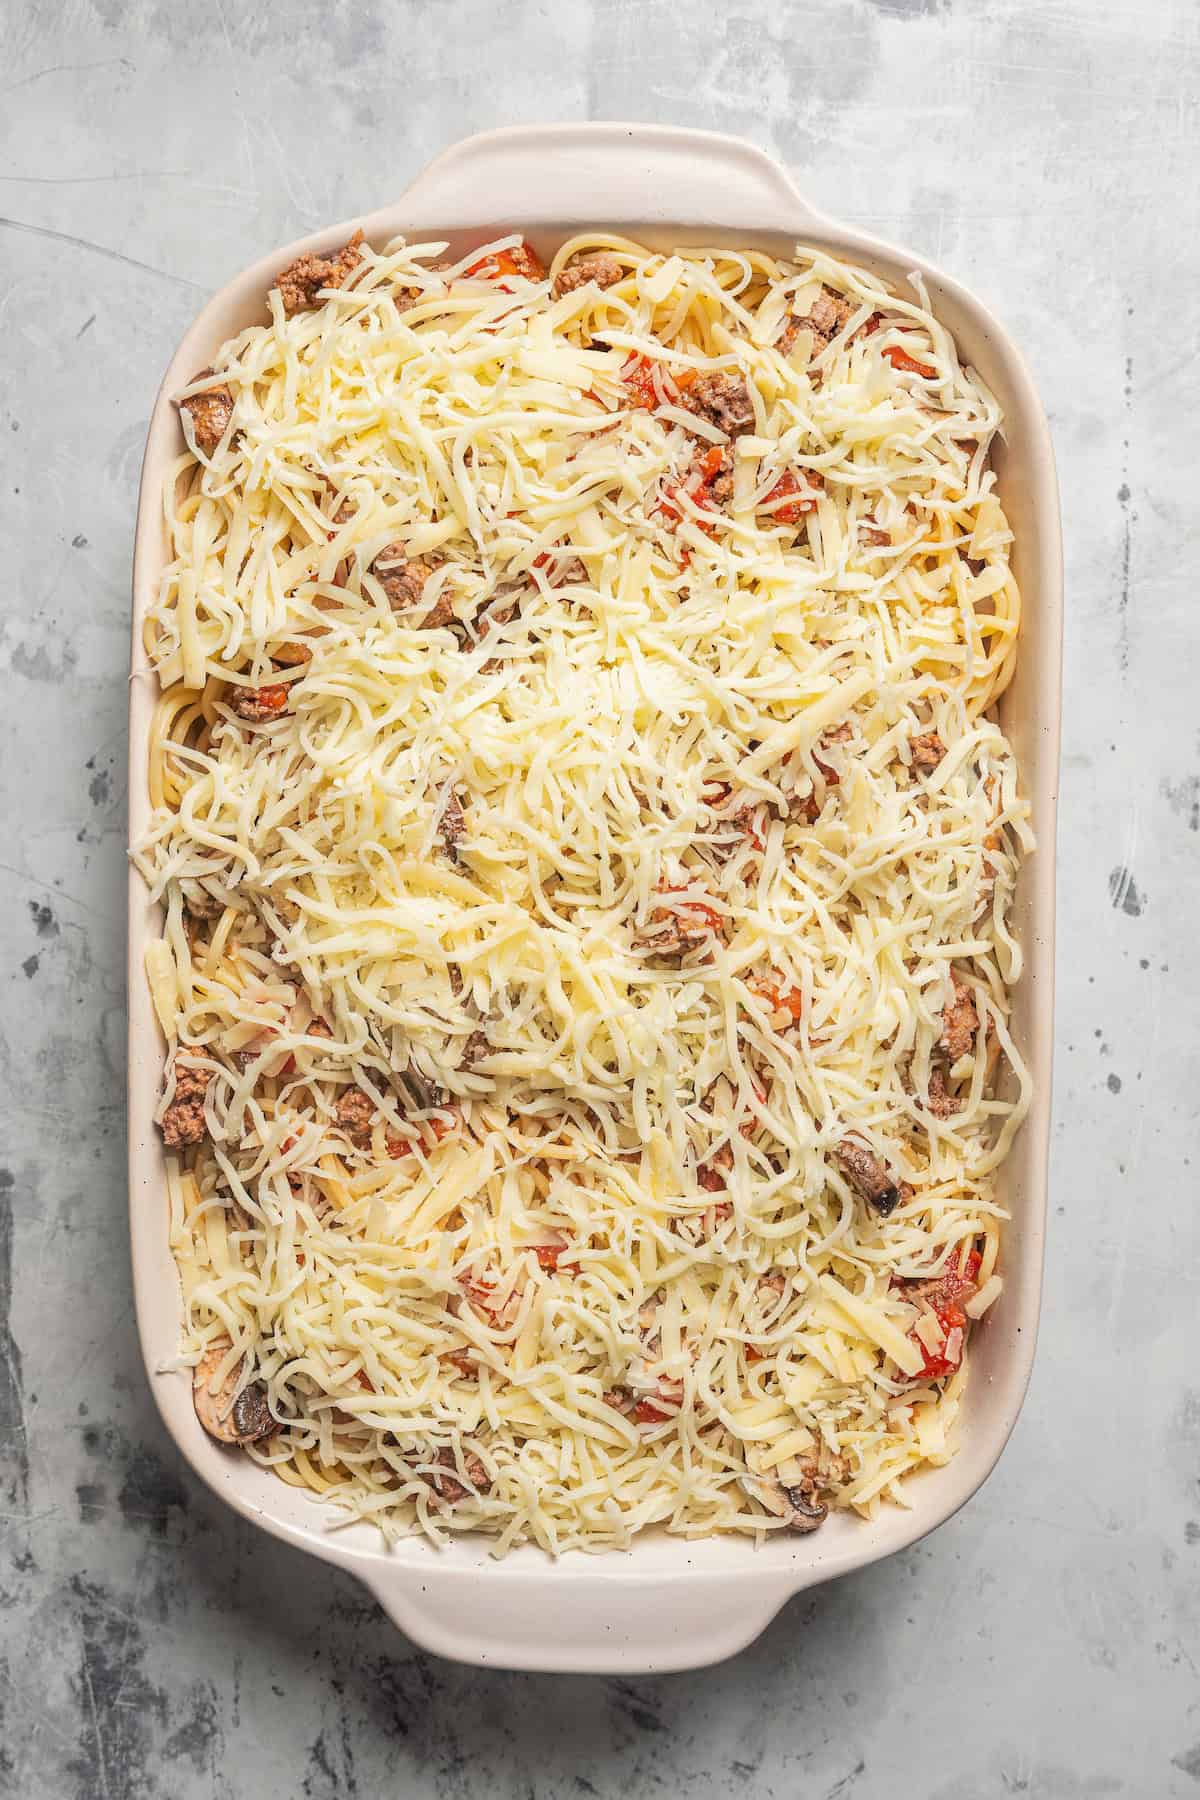 Spaghetti casserole assembled inside a baking dish, topped with shredded cheese.